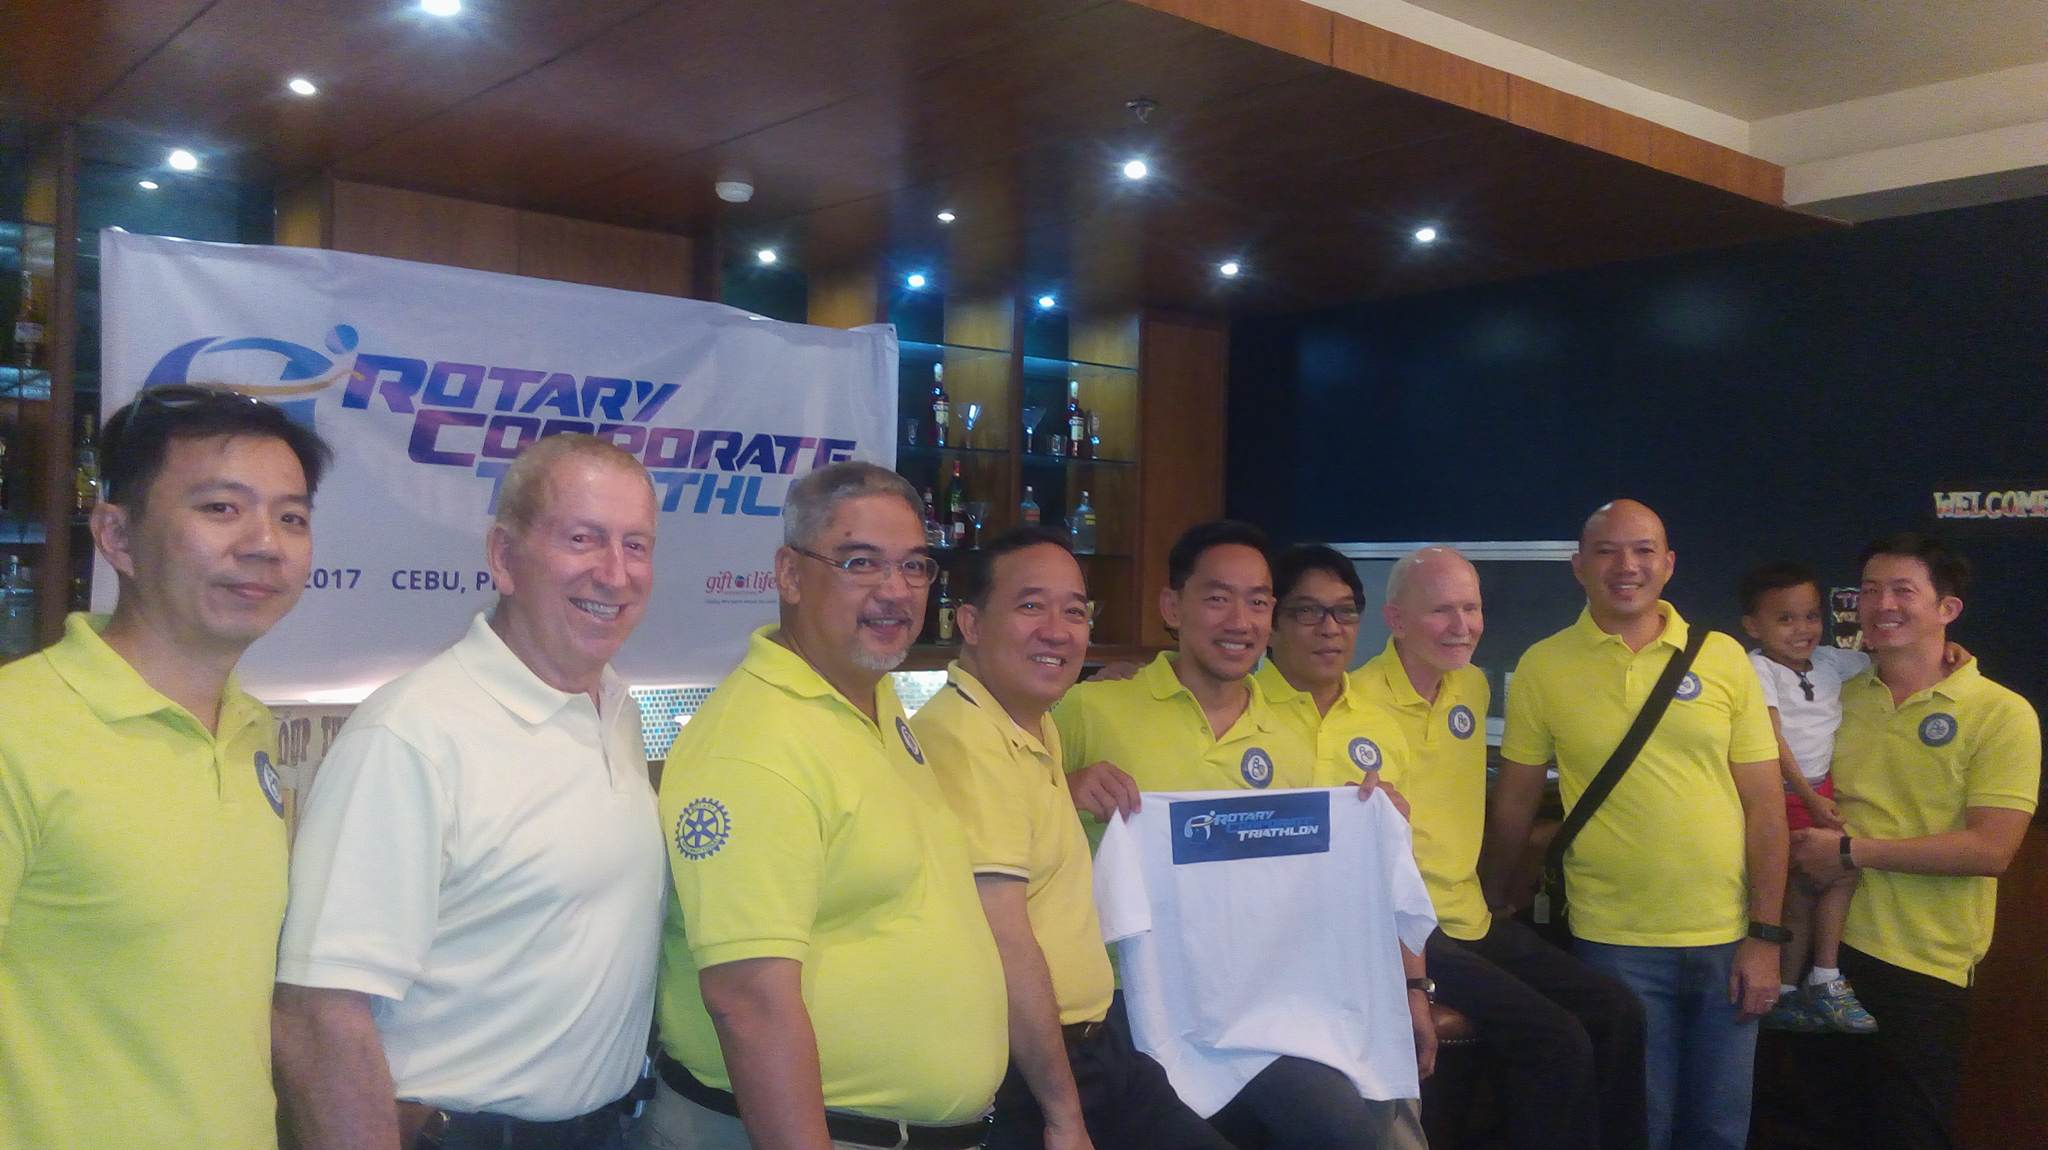 Rotary Club of Cebu officers spearhead the launching of the "Rotary Corporate Triathlon" at the Casino Español.